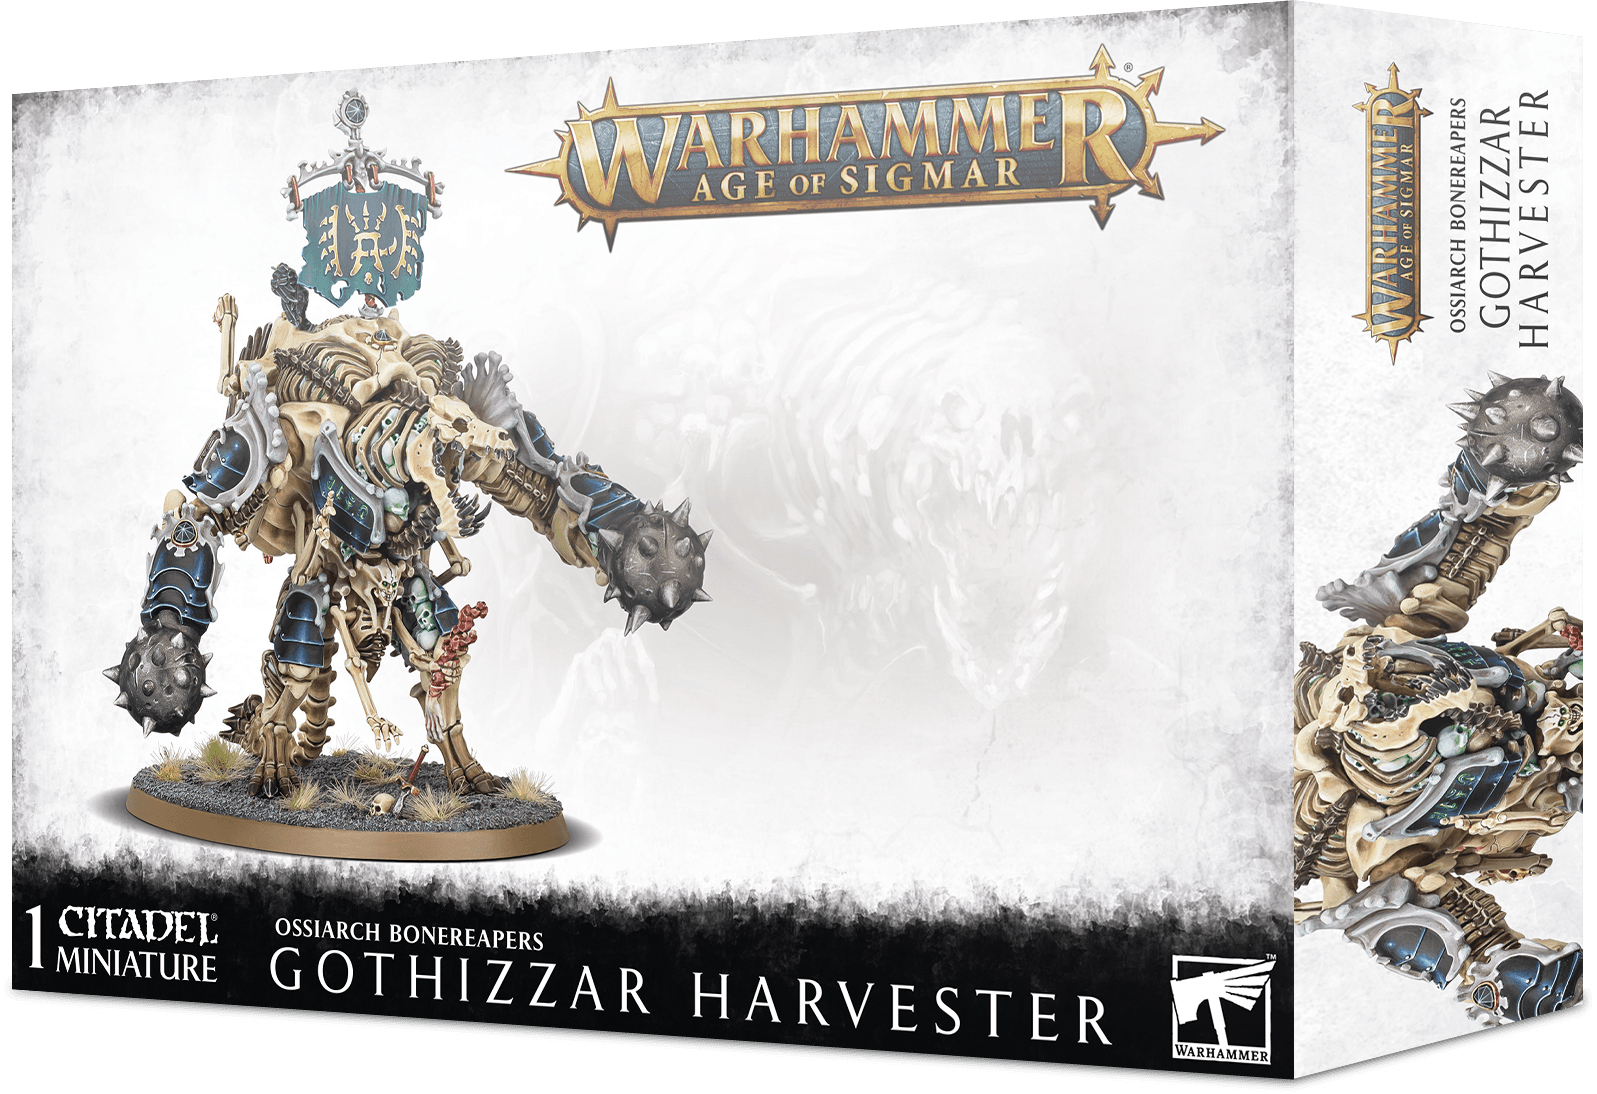 Gothizzar Harvester - 94-29 - Ossiarch Bonereapers - Warhammer Age of Sigmar